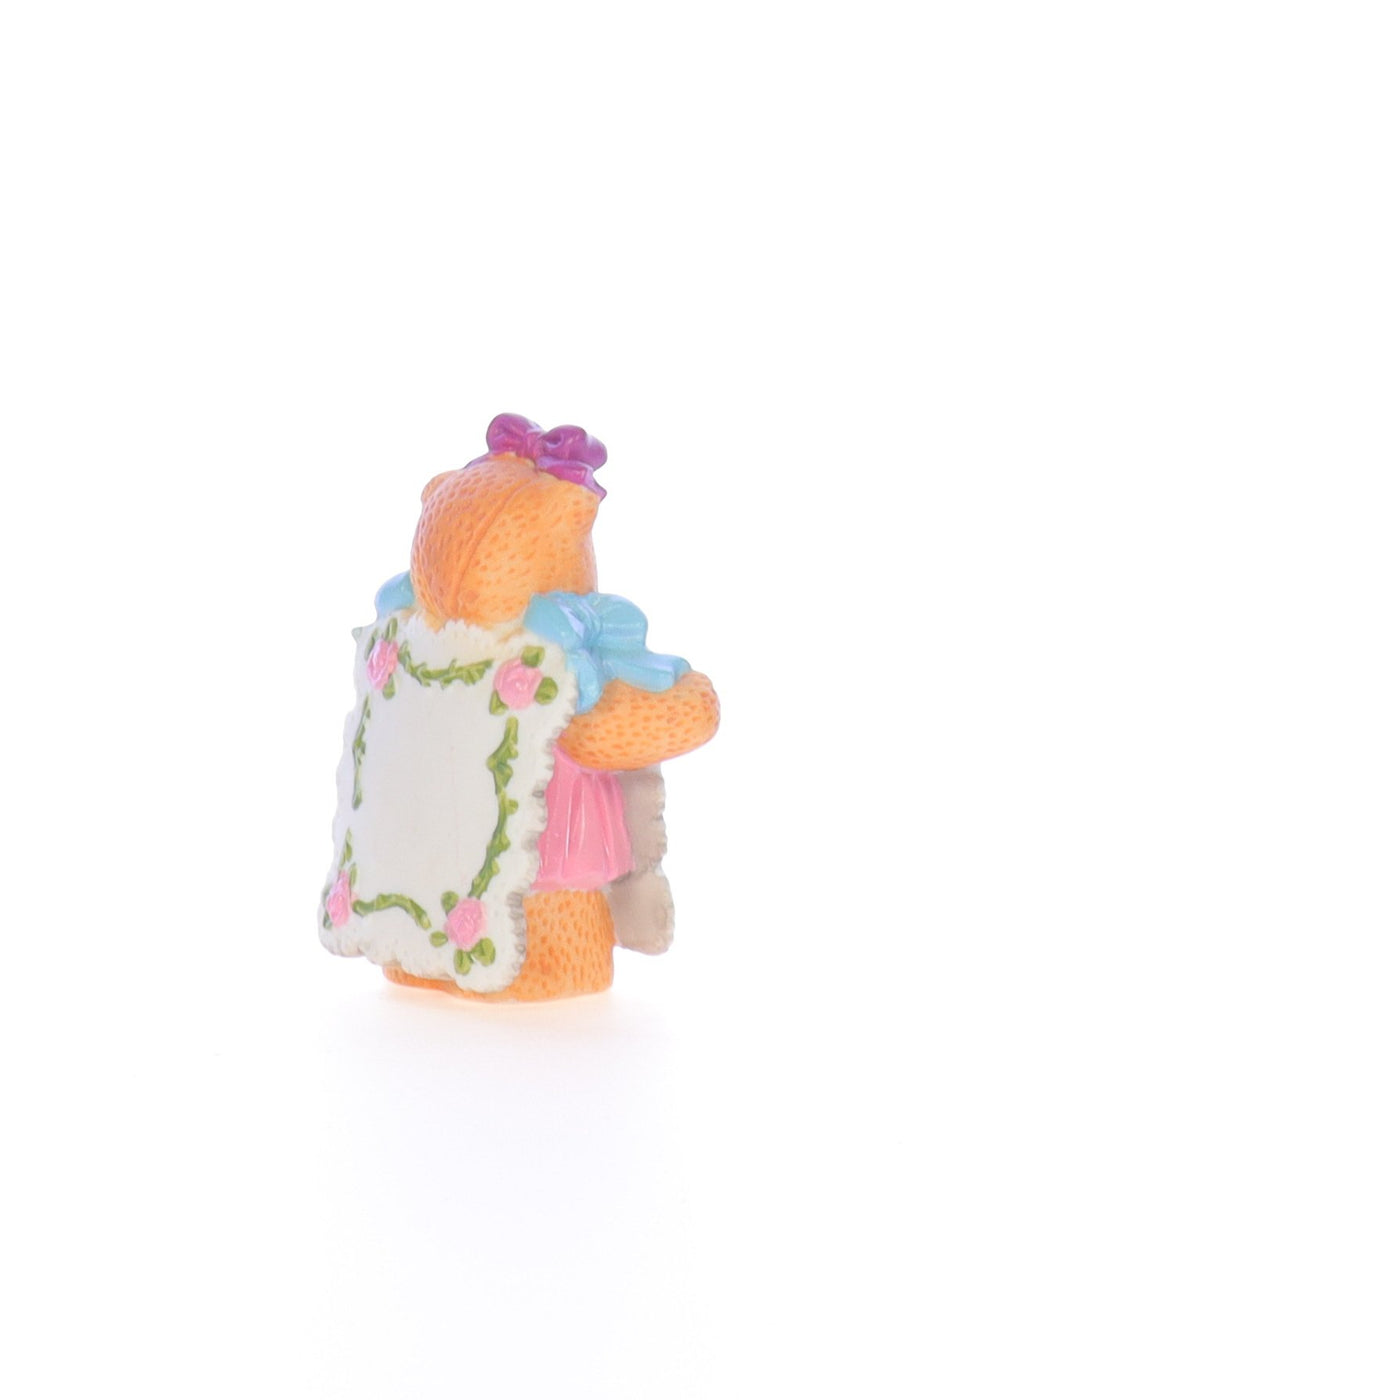 Lucy_And_Me_by_Lucy_Atwell_Porcelain_Figurine_Heart_Card_Bear_Lucy_Unknown_075_06